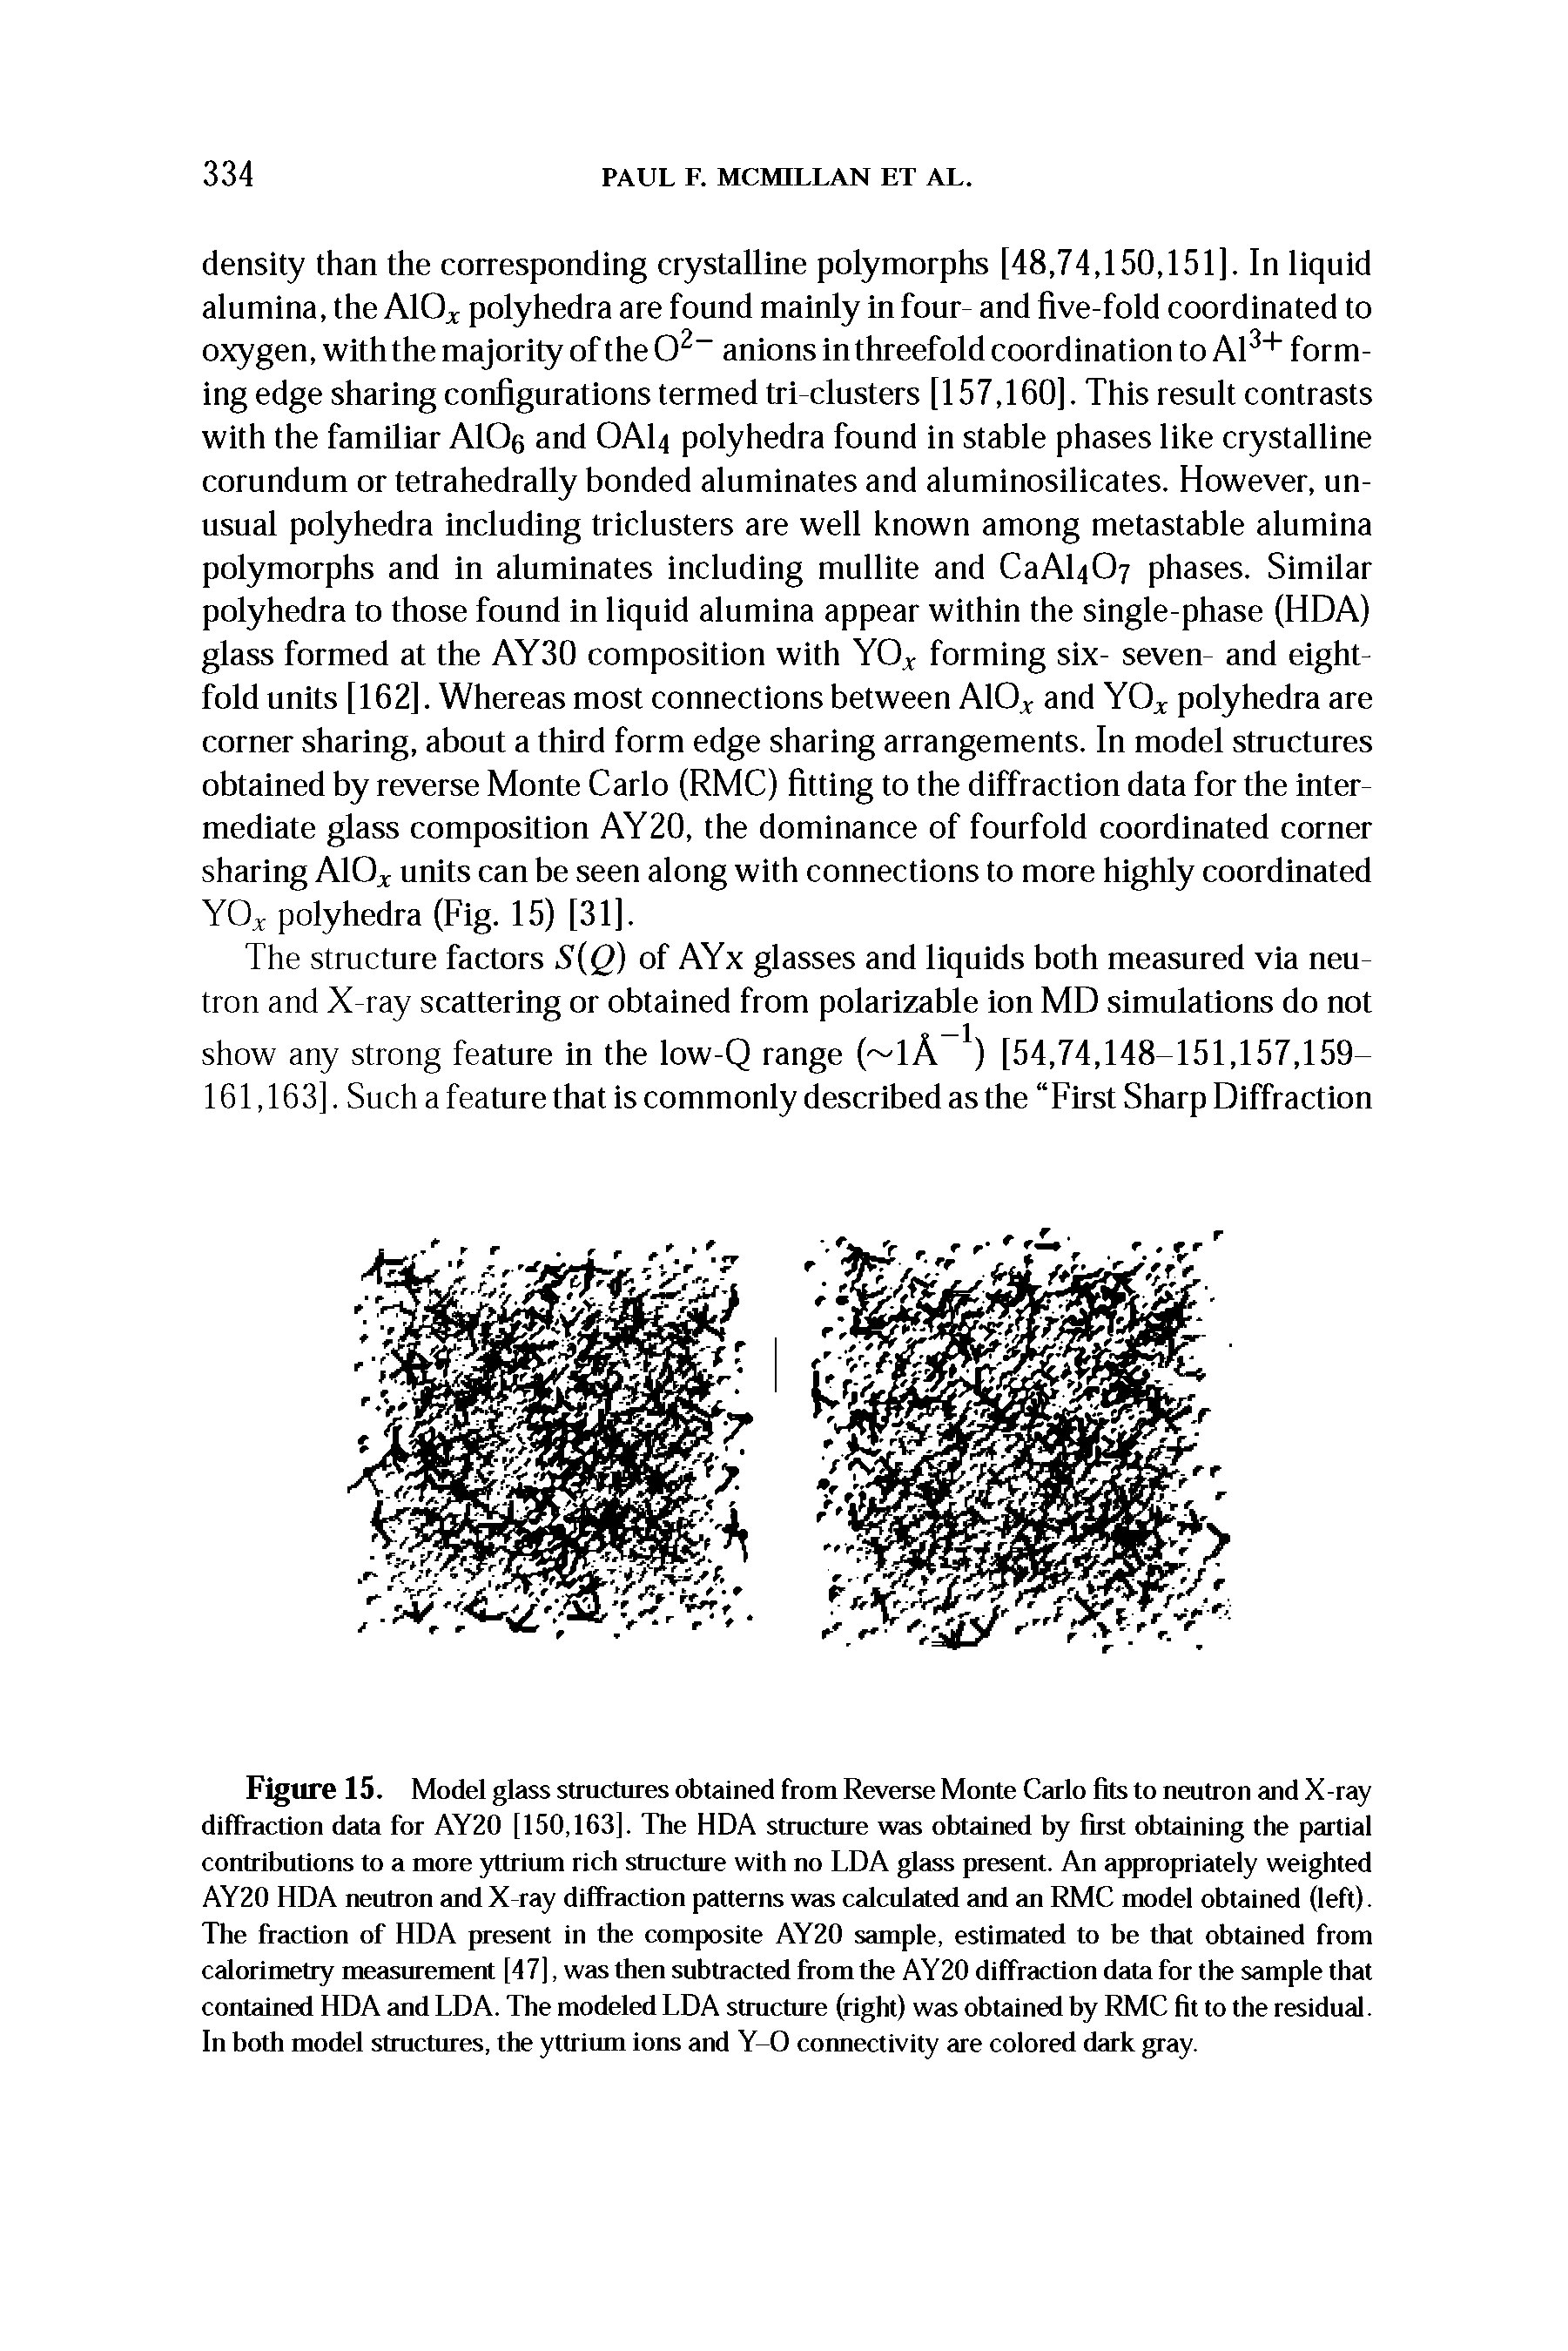 Figure 15, Model glass strudures obtained from Reverse Monte Carlo fits to neutron and X-ray diflraction data for AY20 [150,163], The HDA structure was obtained by first obtaining the partial contributions to a more yttrium rich structure with no LDA glass present. An appropriately weighted AY20 HDA neutron and X ray diffraction patterns was calculated and an RMC model obtained (left). The fraction of HDA present in the composite AY20 sample, estimated to be that obtained from calorimetry measurement [47], was then subtracted from the AY20 diffraction data for the sample that contained HDA and LDA, The modeled LDA sttucture lght) was obtained hy RMC fit to the residual. In both model structures, the yttrium ions and Y coimectivity are colored dark gray.